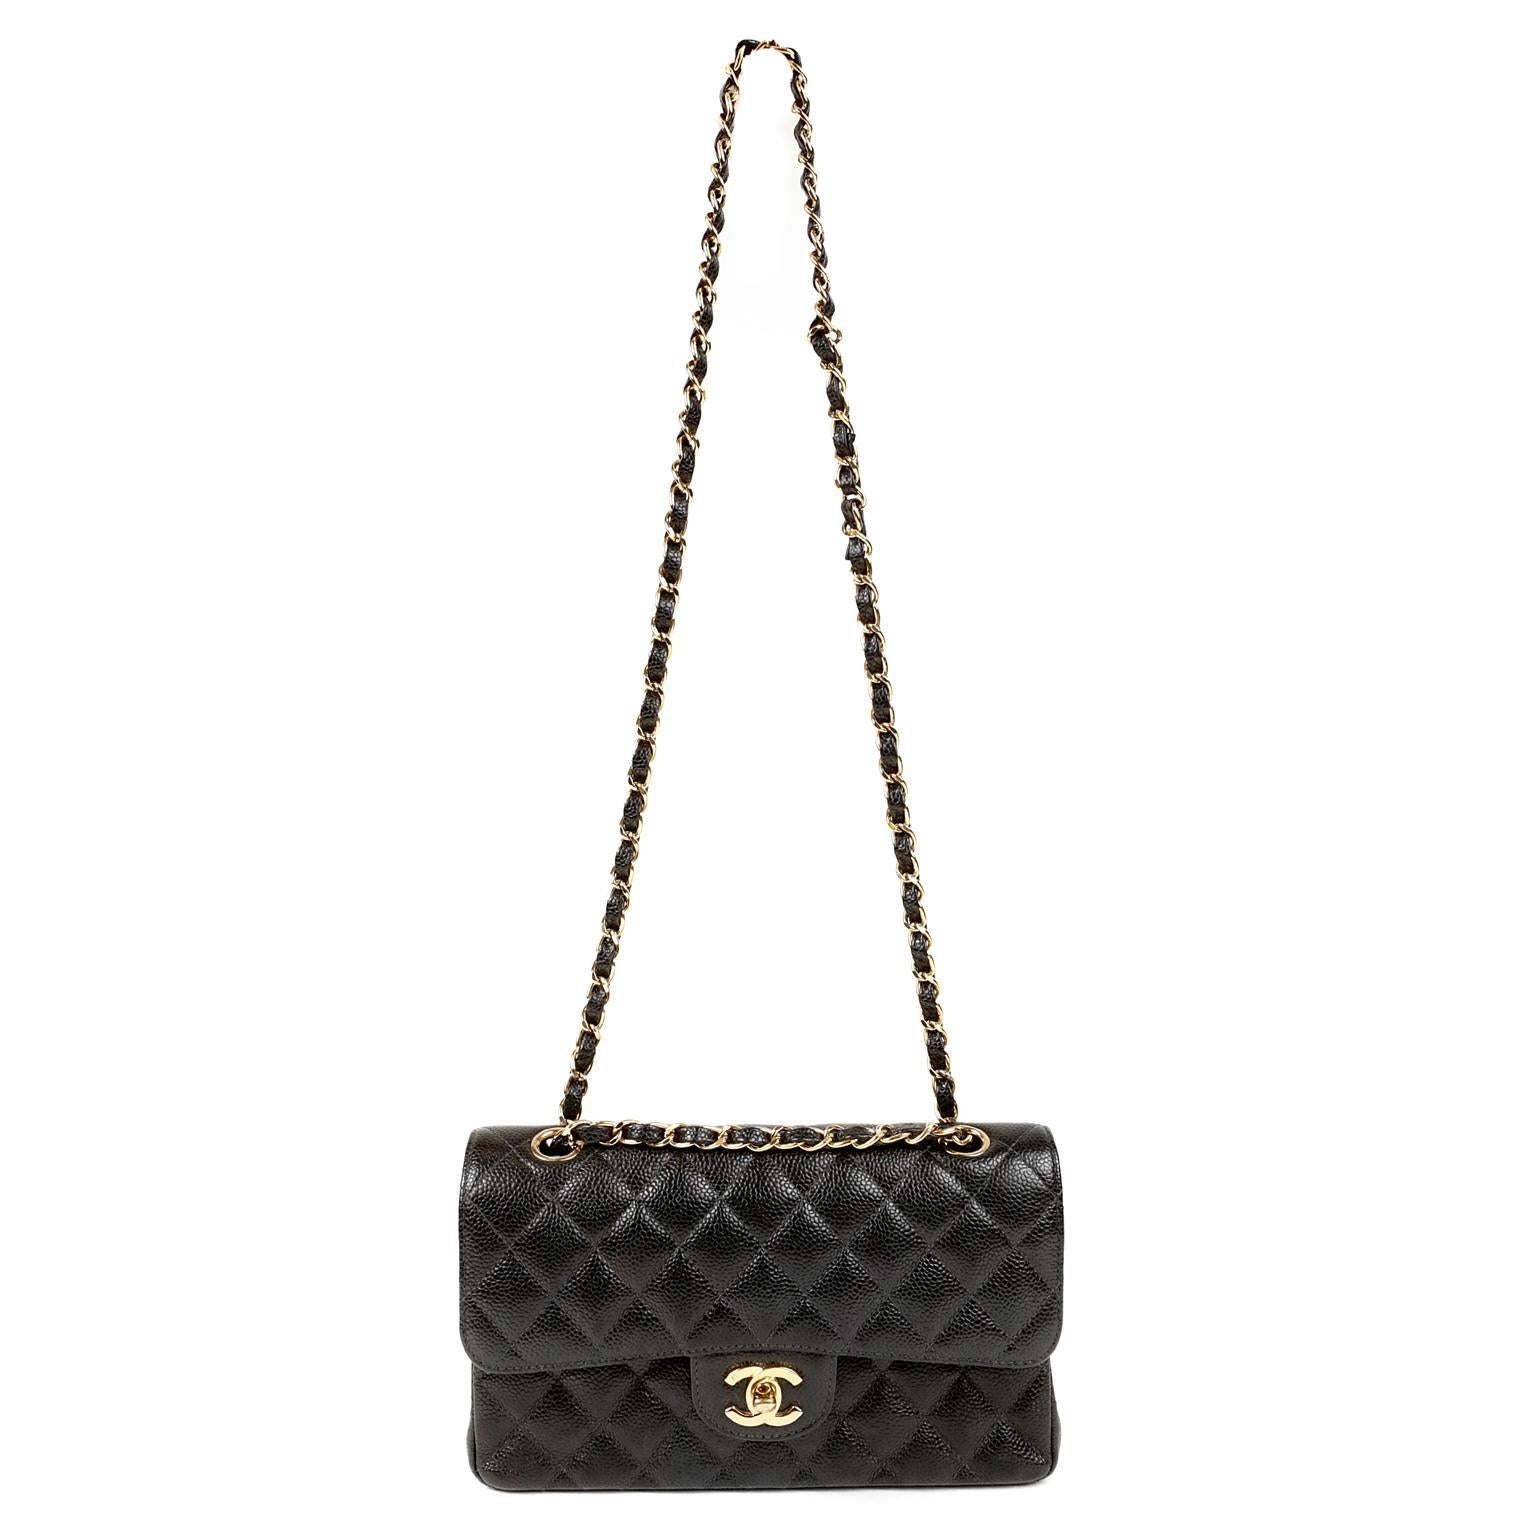 Chanel Black Caviar Classic Small Double Flap Bag- MINT
 A true must have for any sophisticated collection, the Classic in black caviar with gold hardware is intensely coveted.
Durable and textured black caviar leather is quilted in signature Chanel